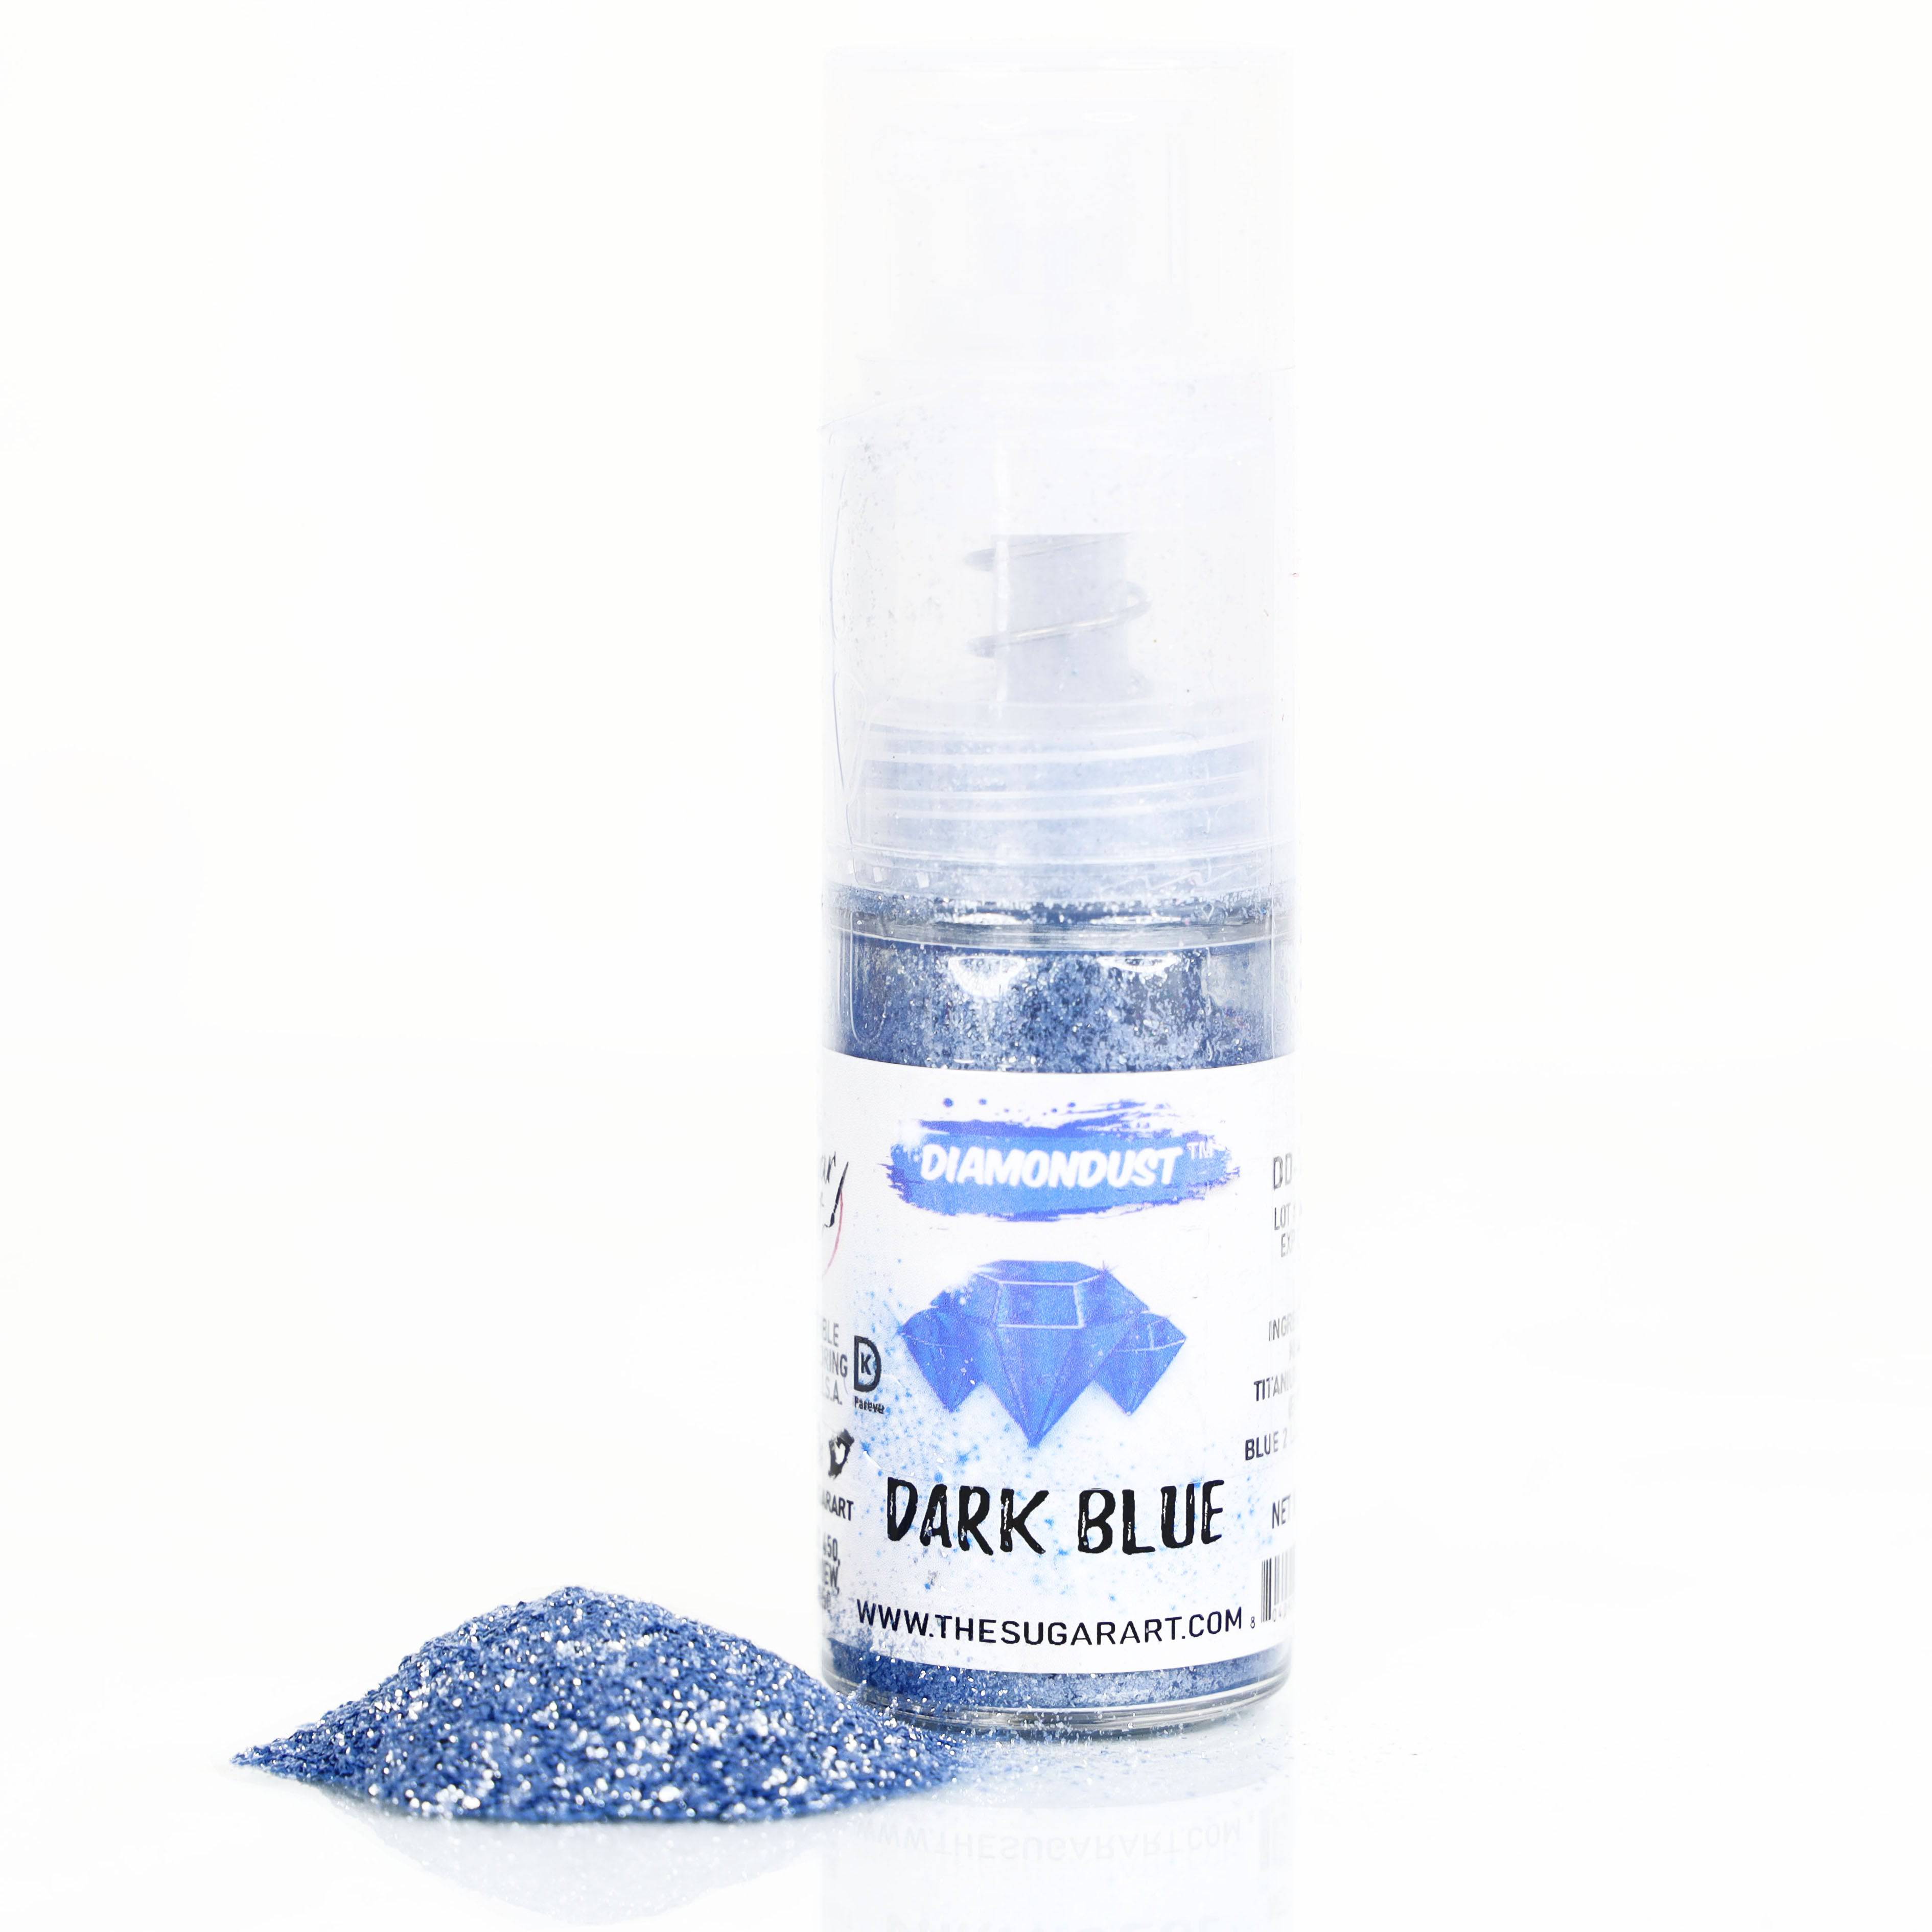 Glitter and Mica Powder are not the same thing! - The Blue Bottle Tree